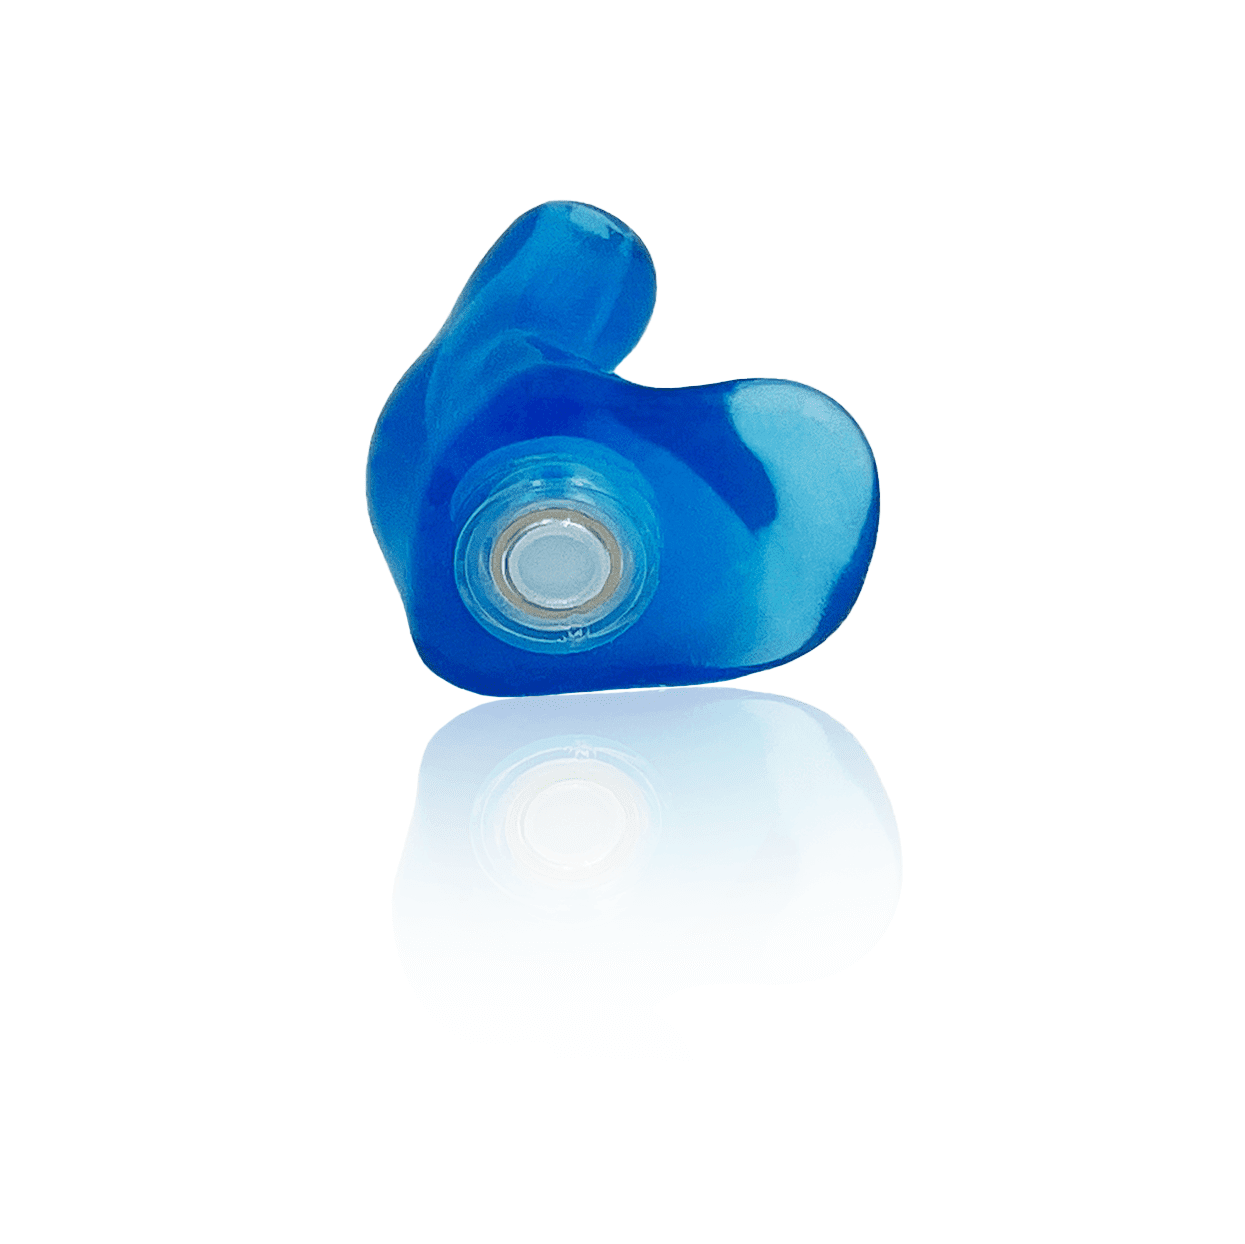 Featured image for “ER Musician Earplugs”